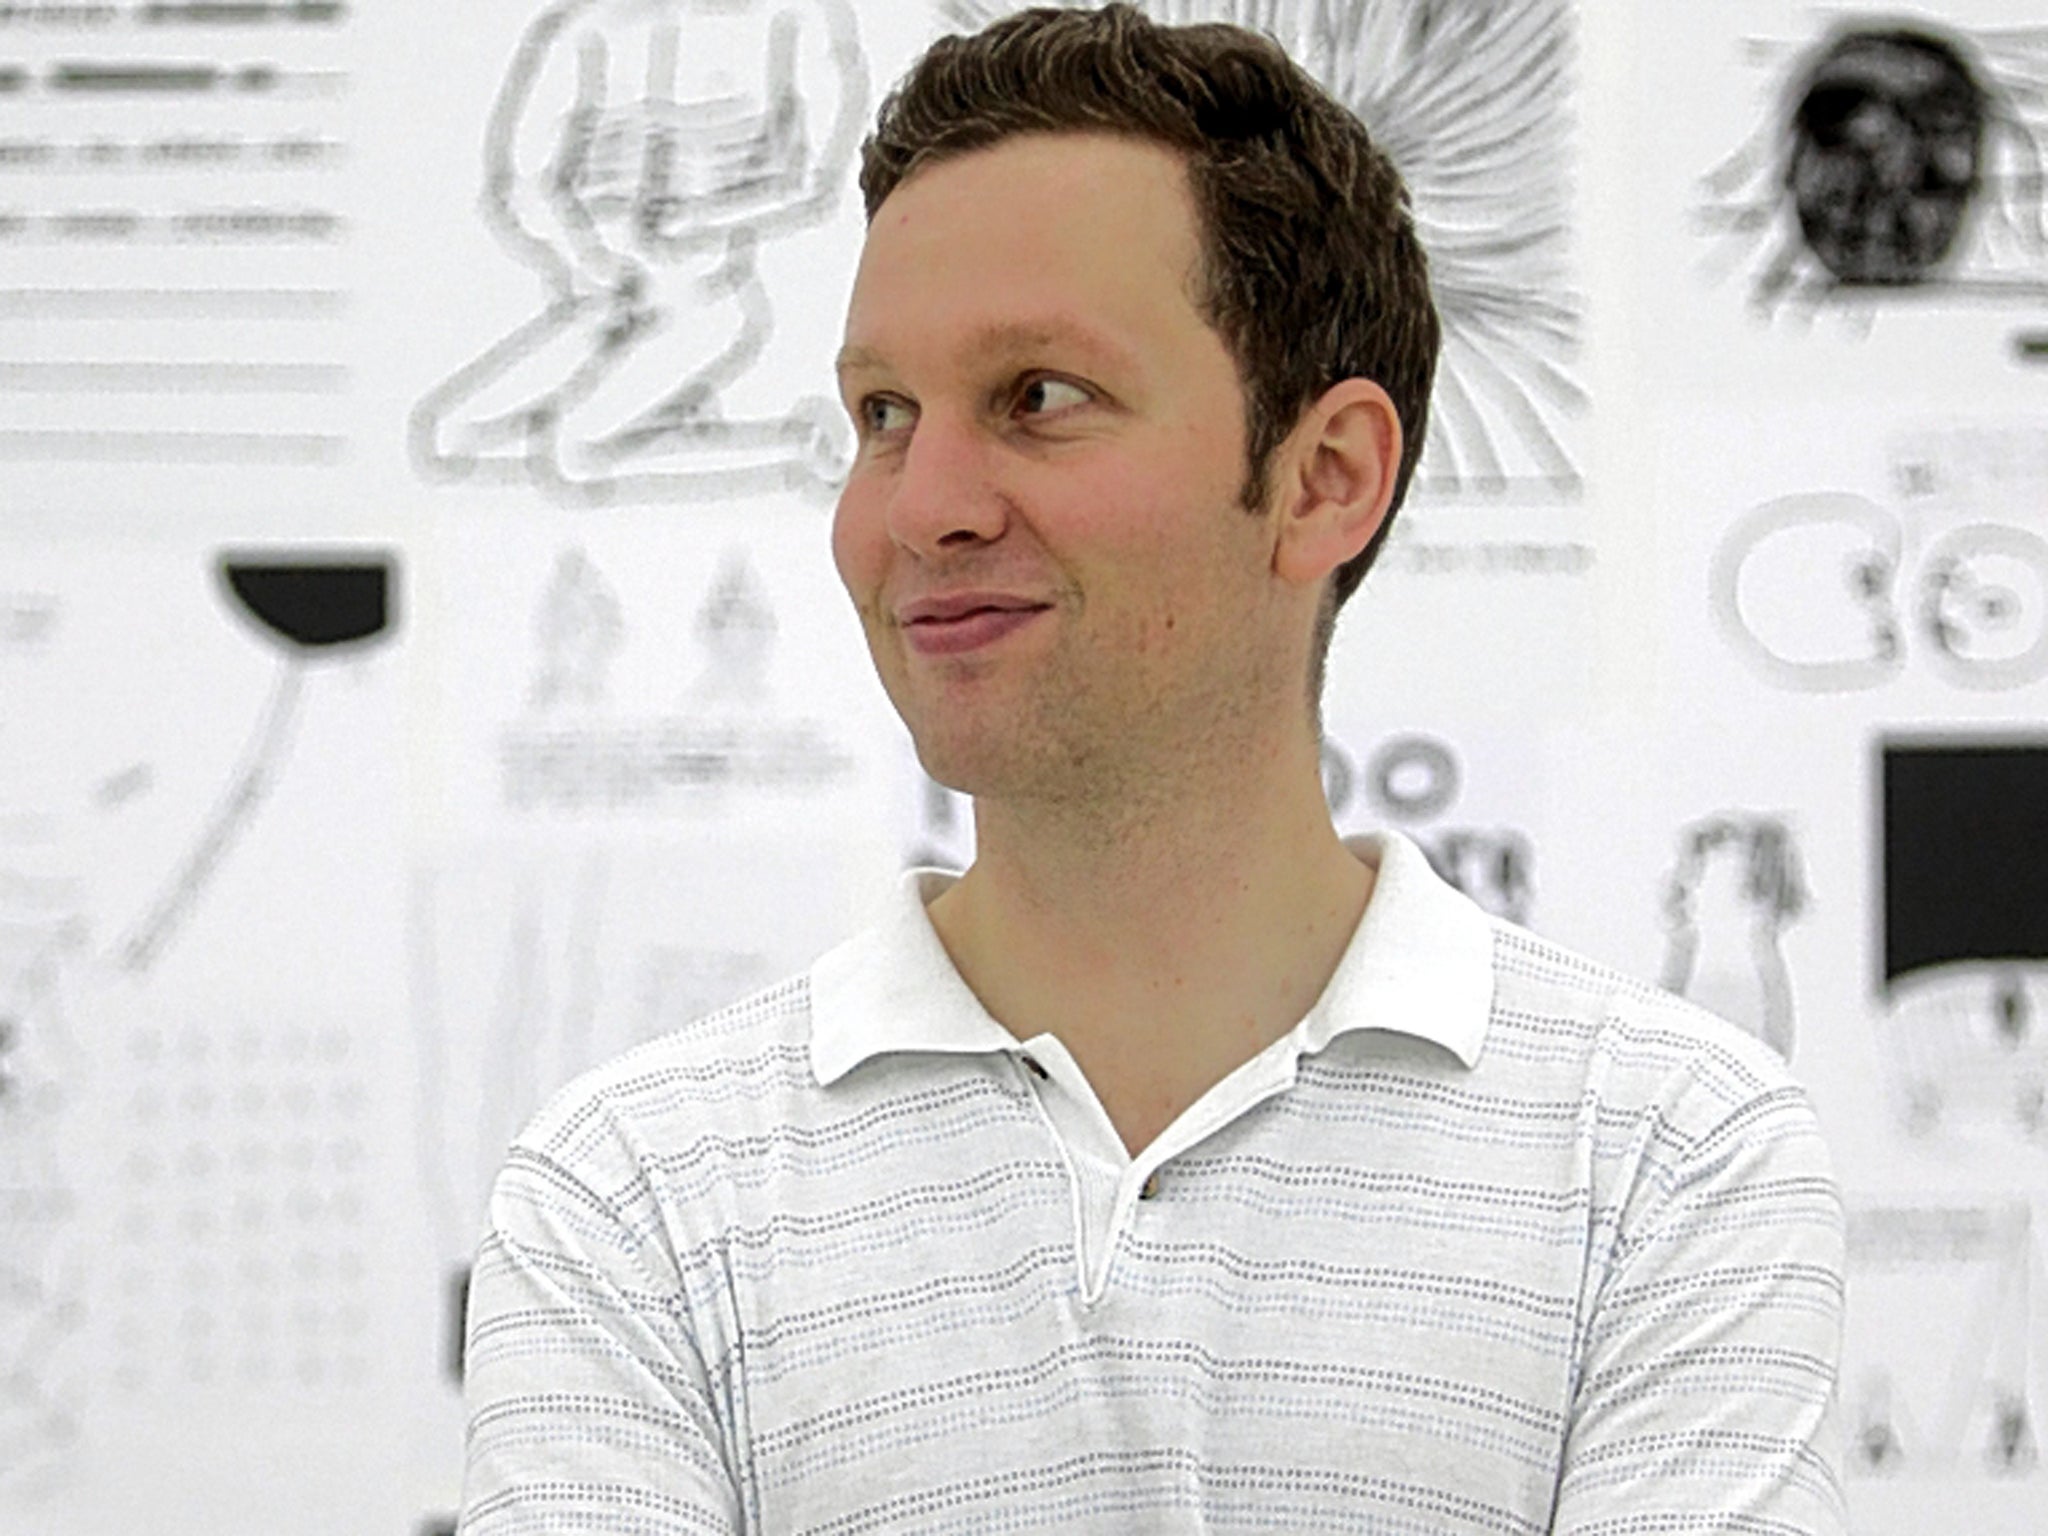 Just for the record: David Shrigley